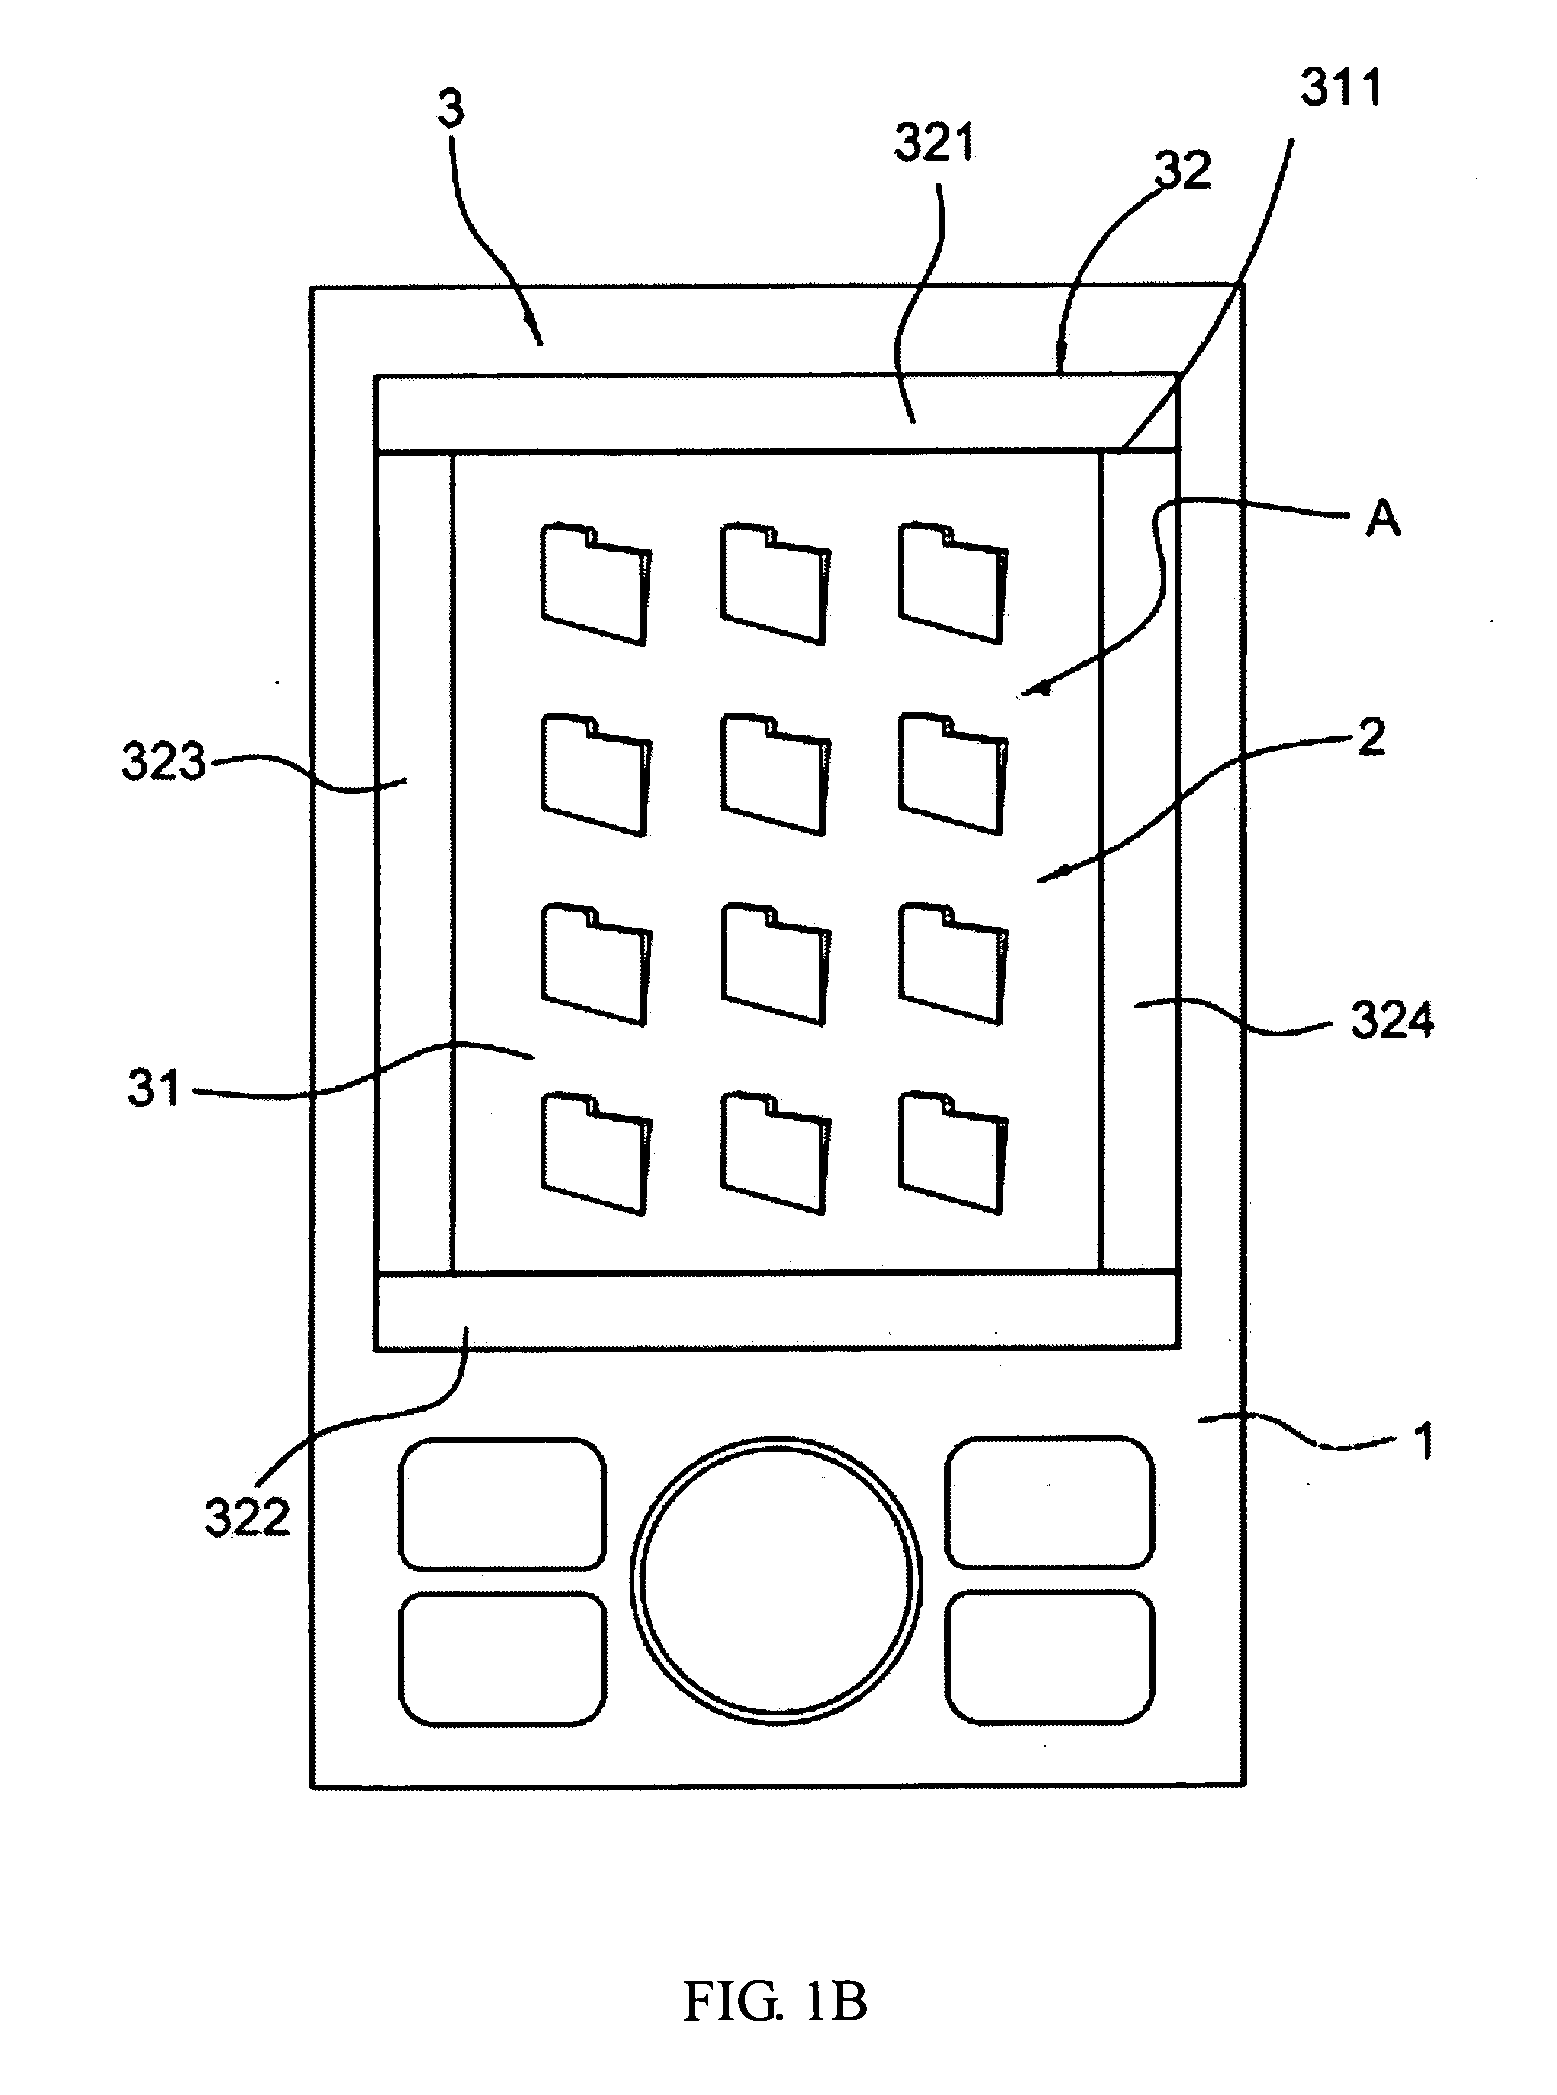 Method and apparatus for performing view switching functions on handheld electronic device with touch screen